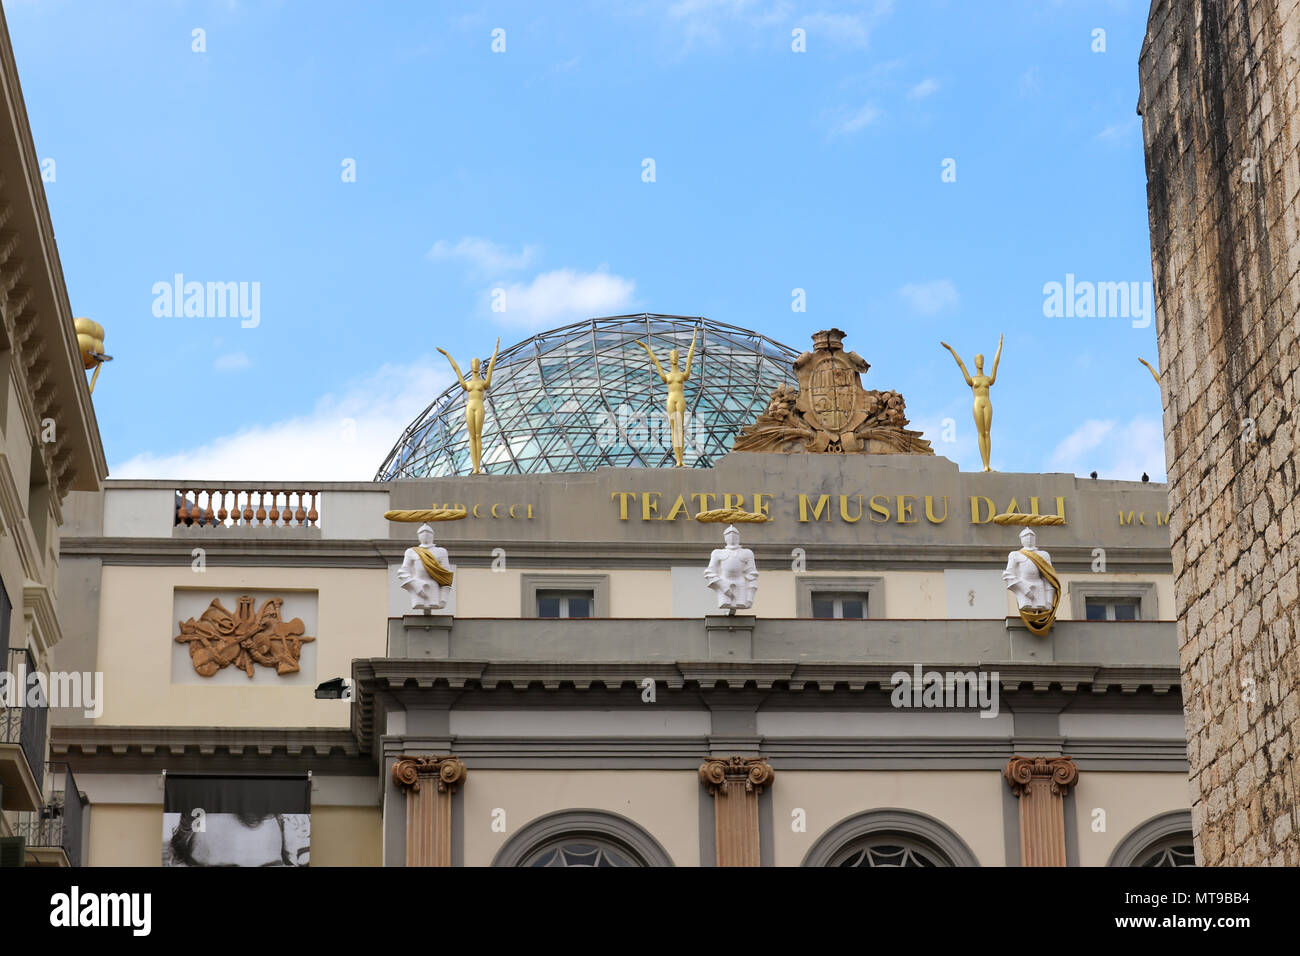 Glass dome and gold statues adorn the top of the Salvador Dali Theatre Museum at the entrance. Figueres, Girona, Catelonia, Spain. Stock Photo